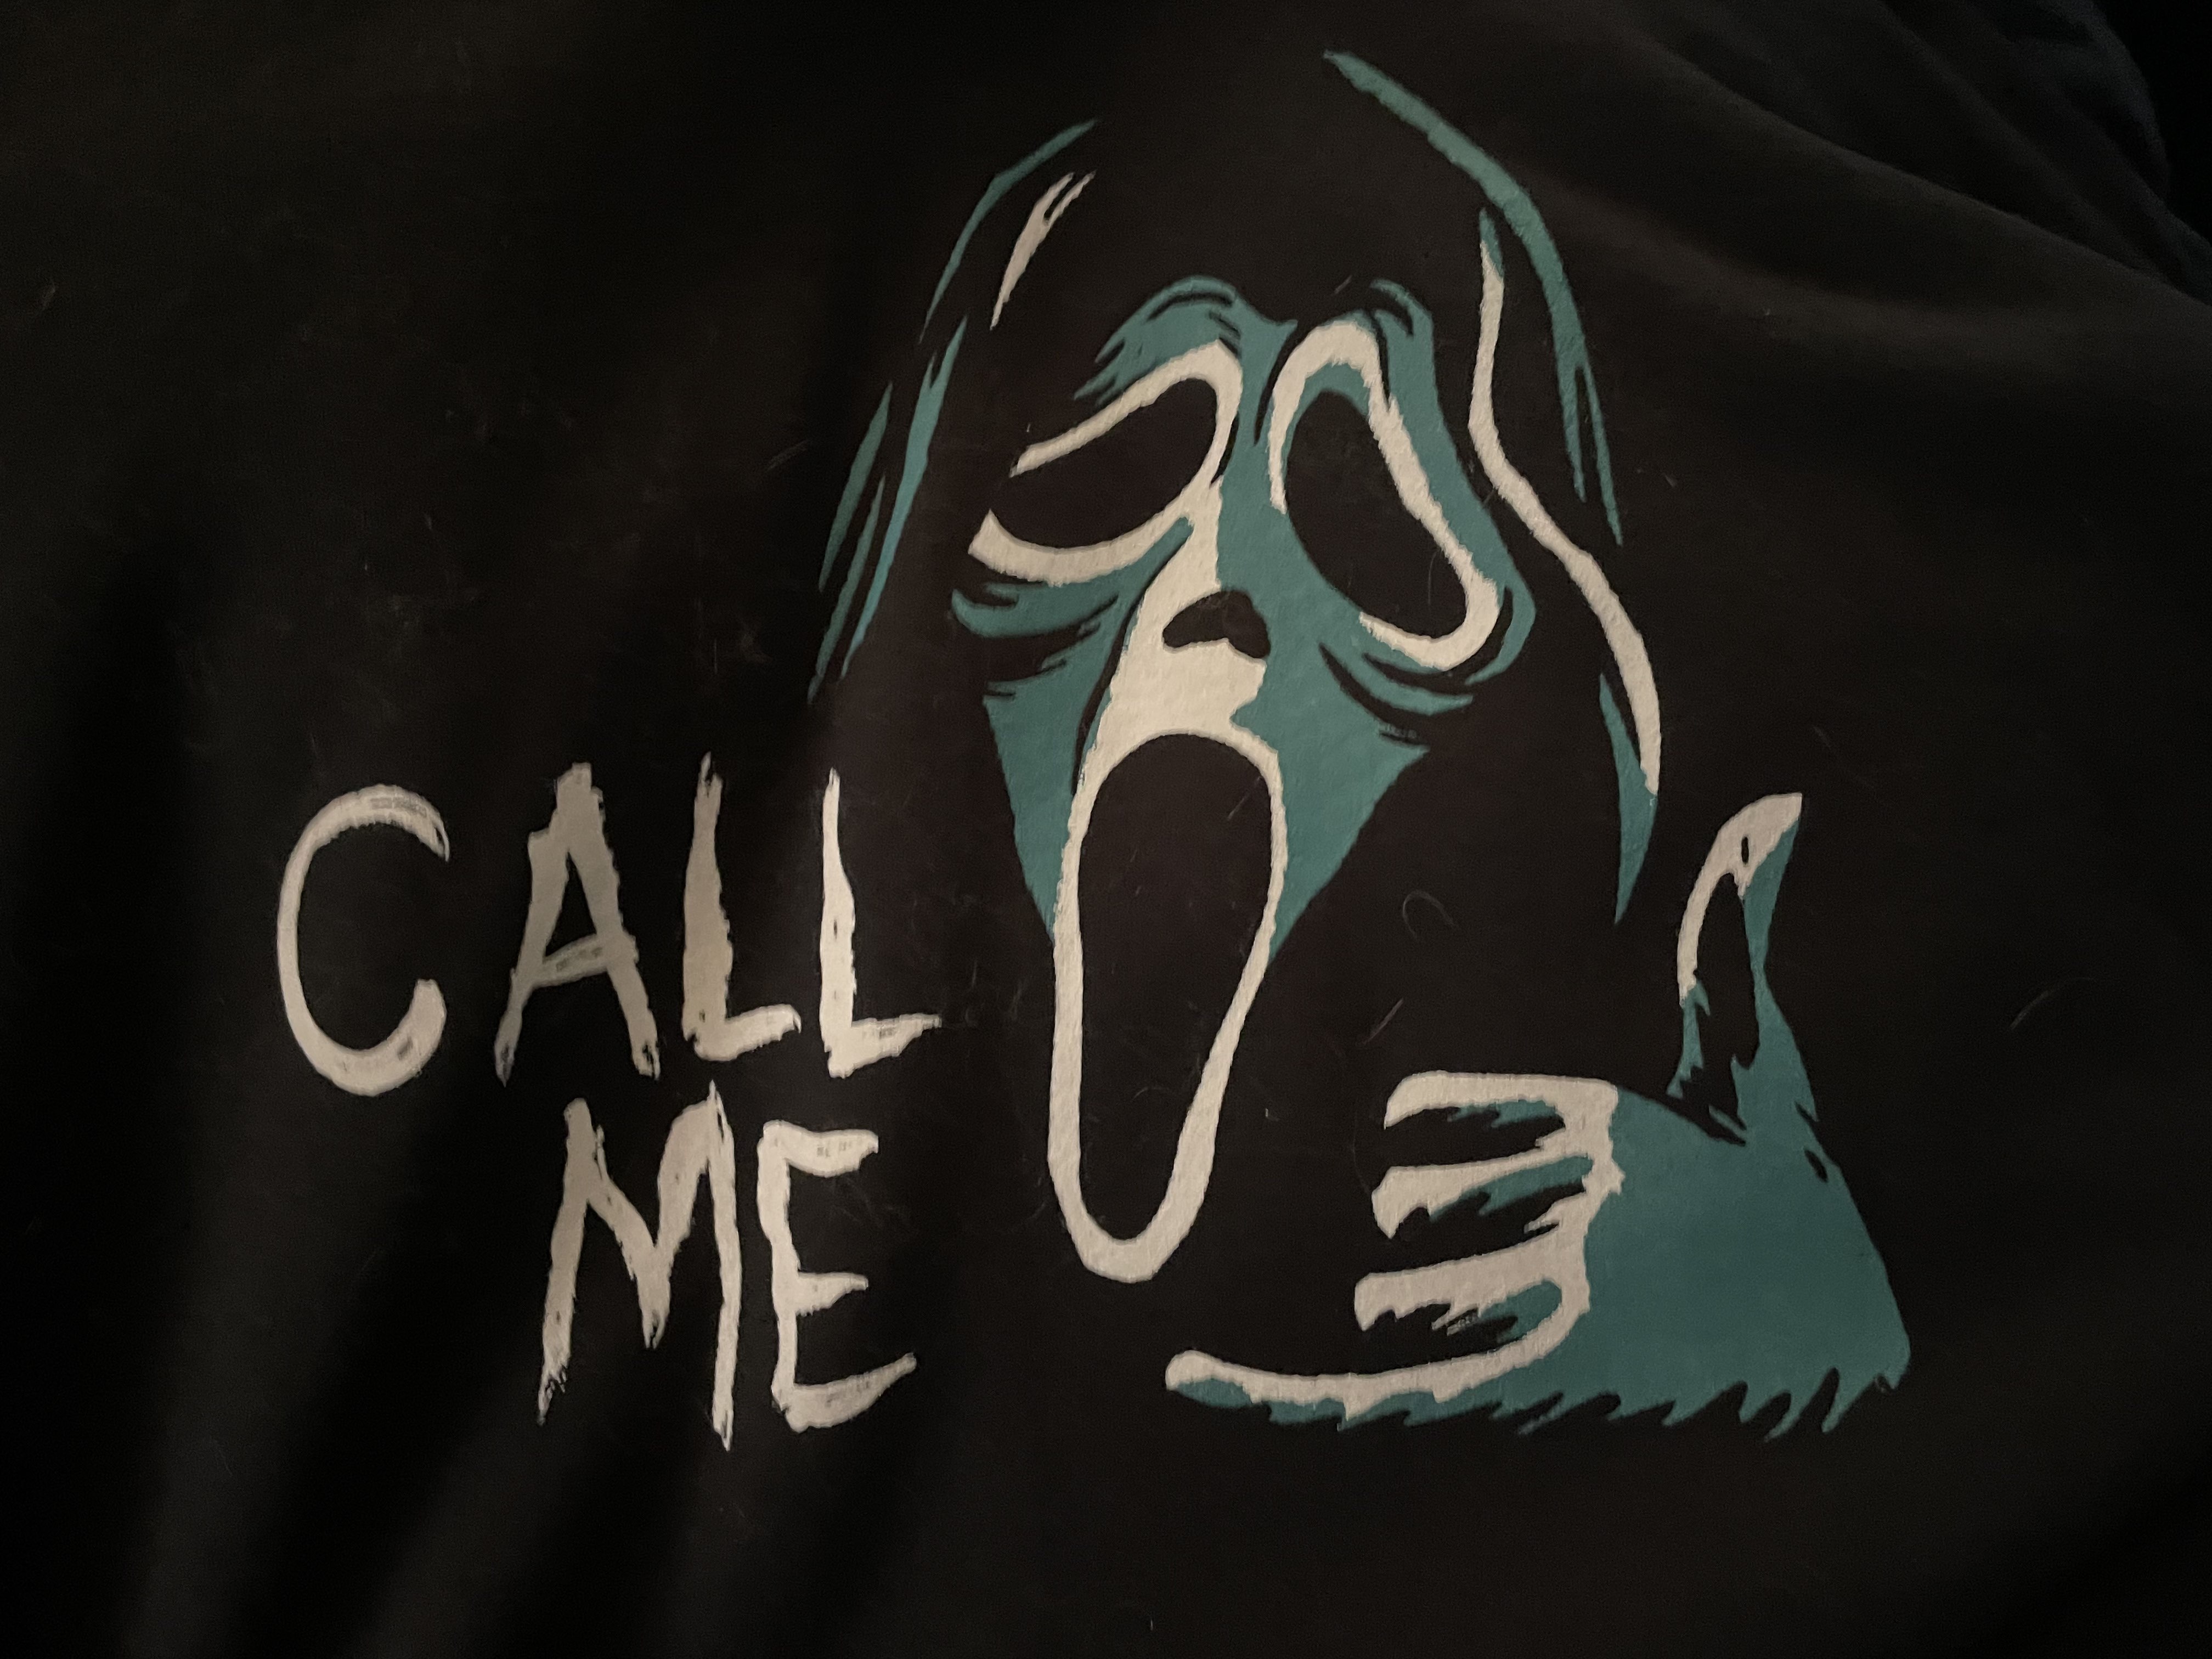 AN IMAGE OF THE PRINT ON MY GHOSTFACE HOODIE. GHOSTFACE IS HOLDING UP THE 'PHONE' SIGN WITH HIS HAND TO HIS EAR. IT'S CAPTIONED 'CALL ME'.